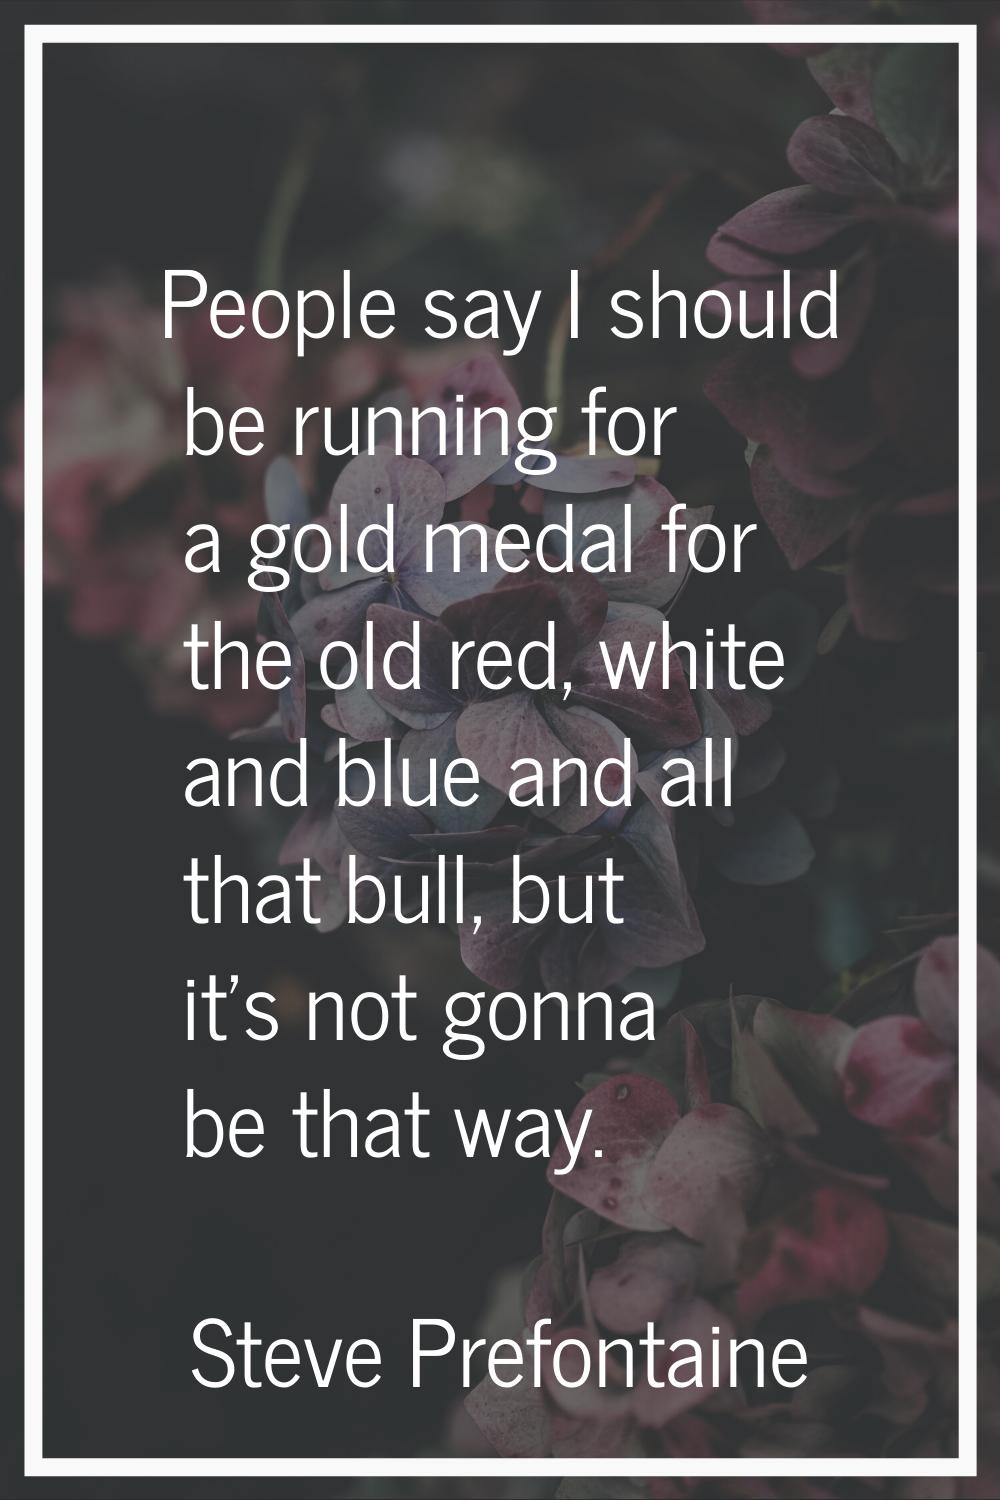 People say I should be running for a gold medal for the old red, white and blue and all that bull, 